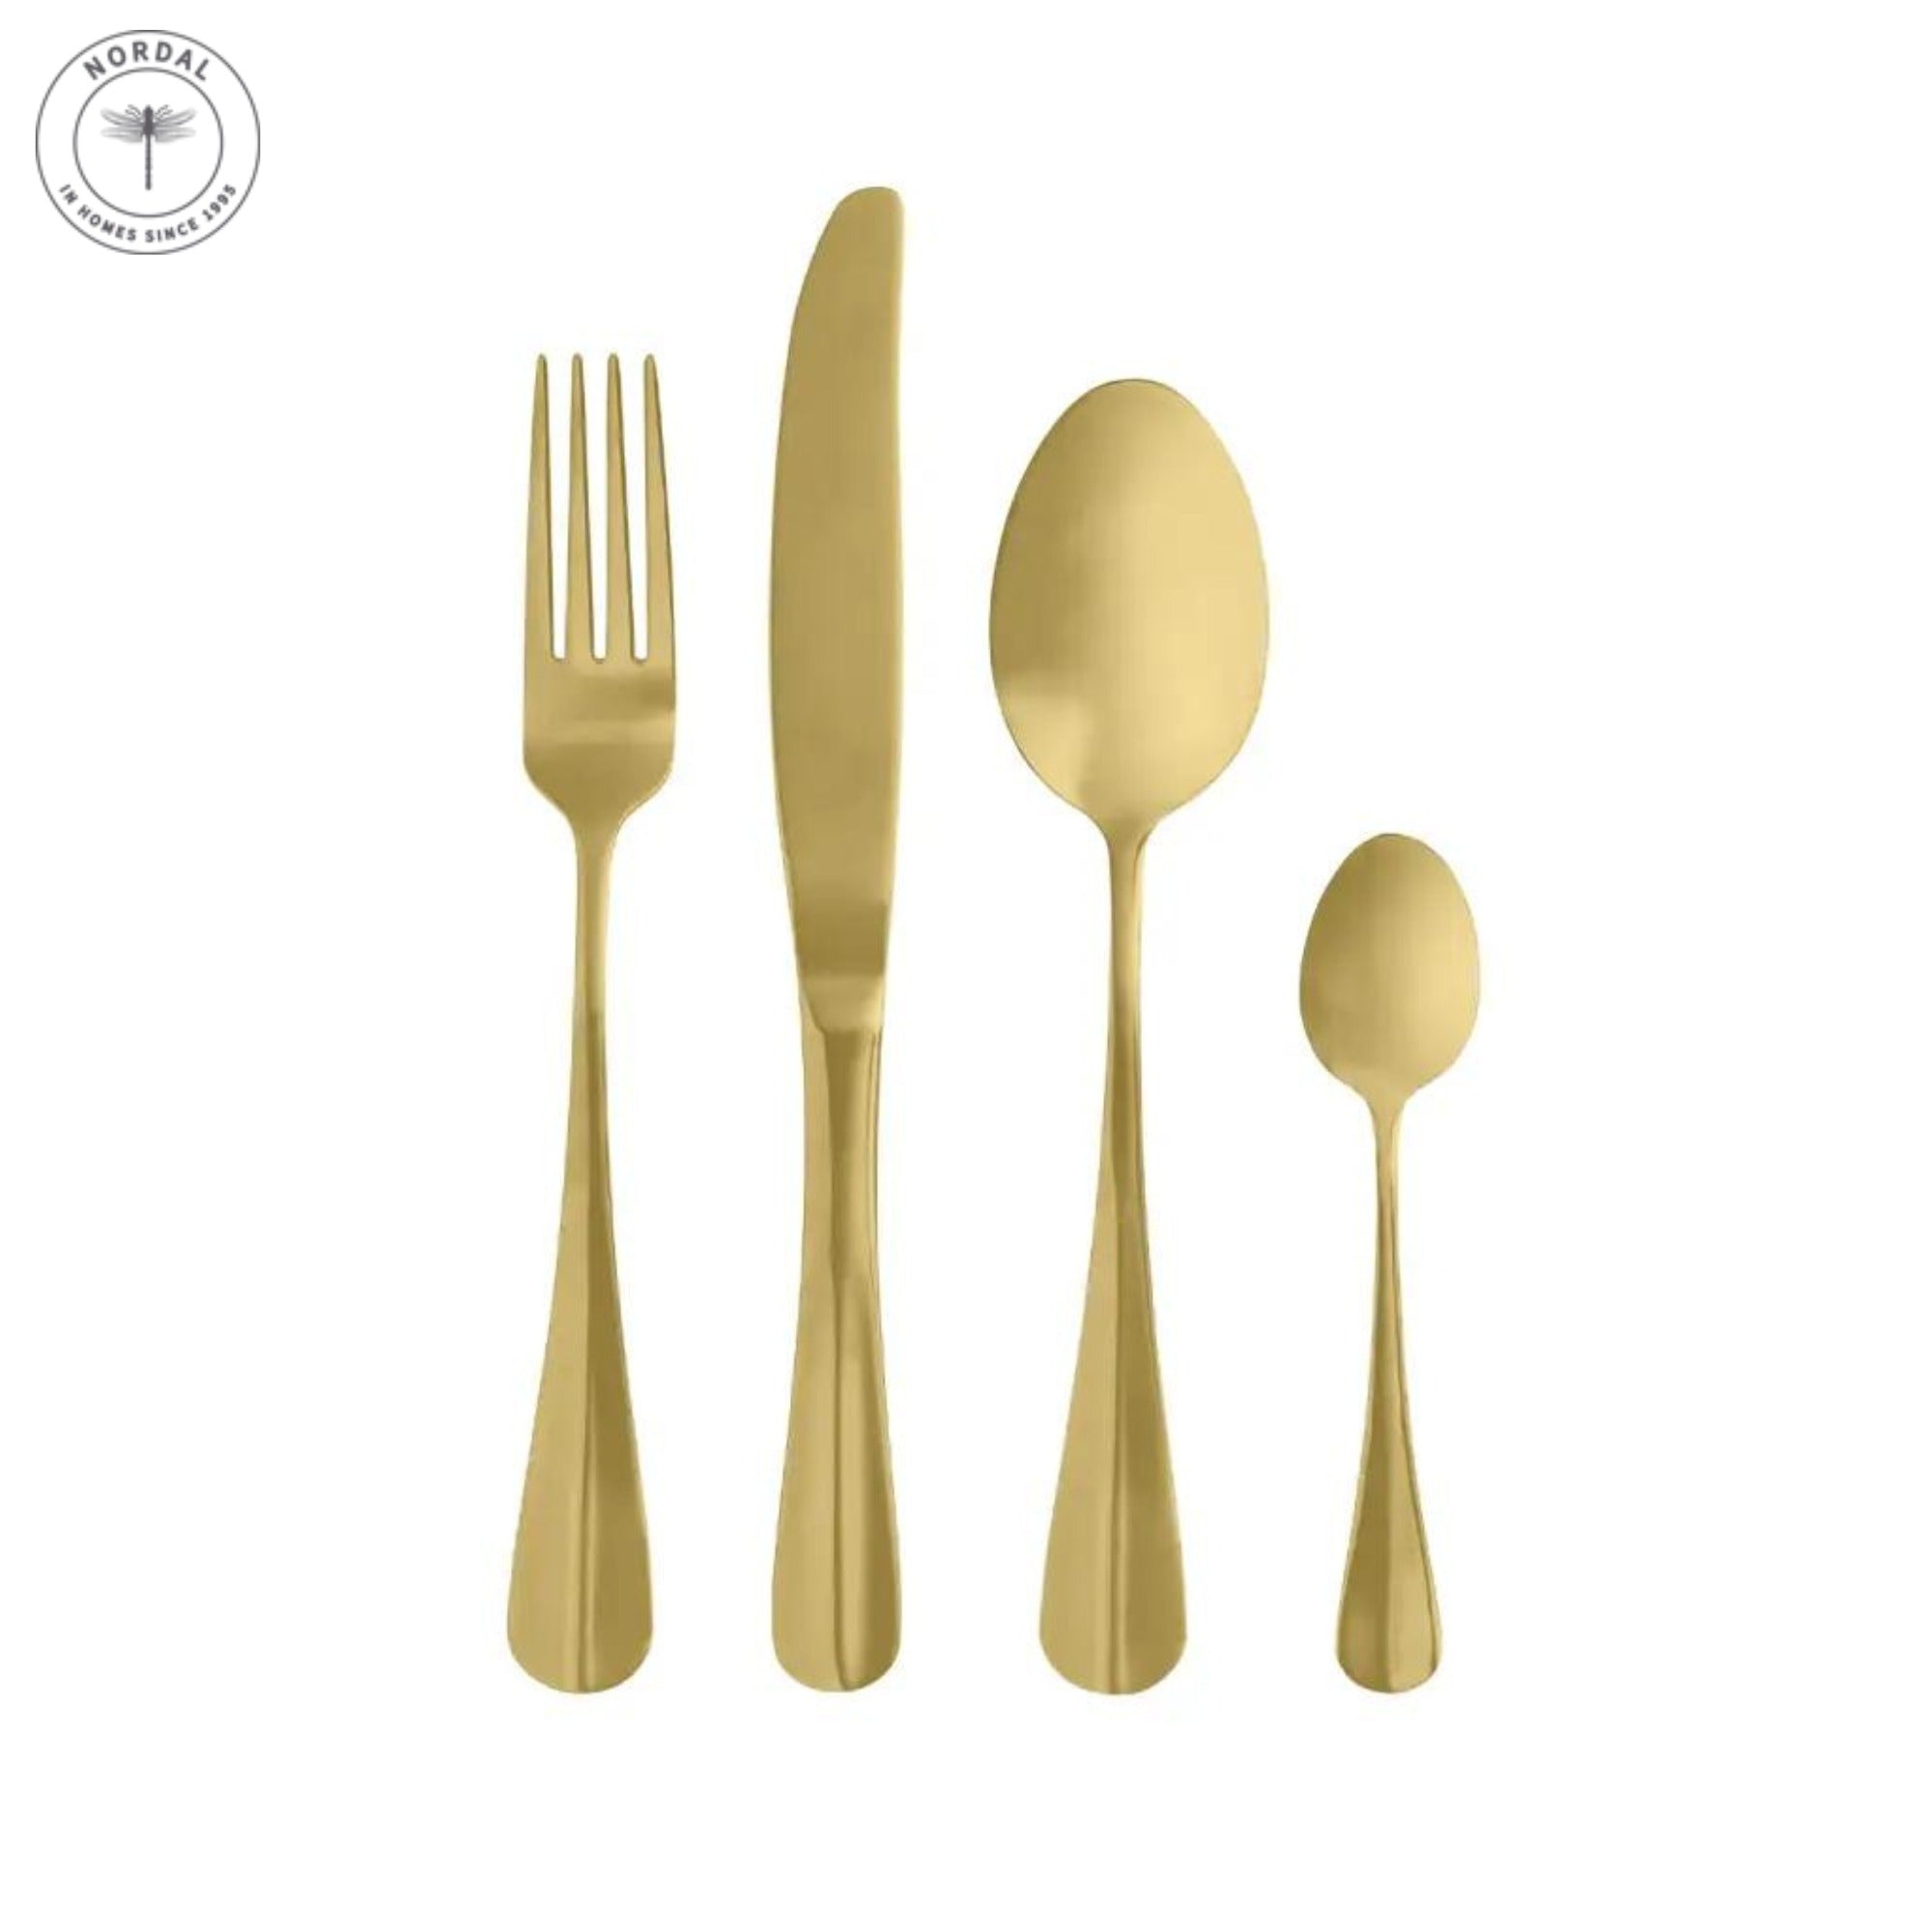 Nordal Denmark gold colored cutlery set